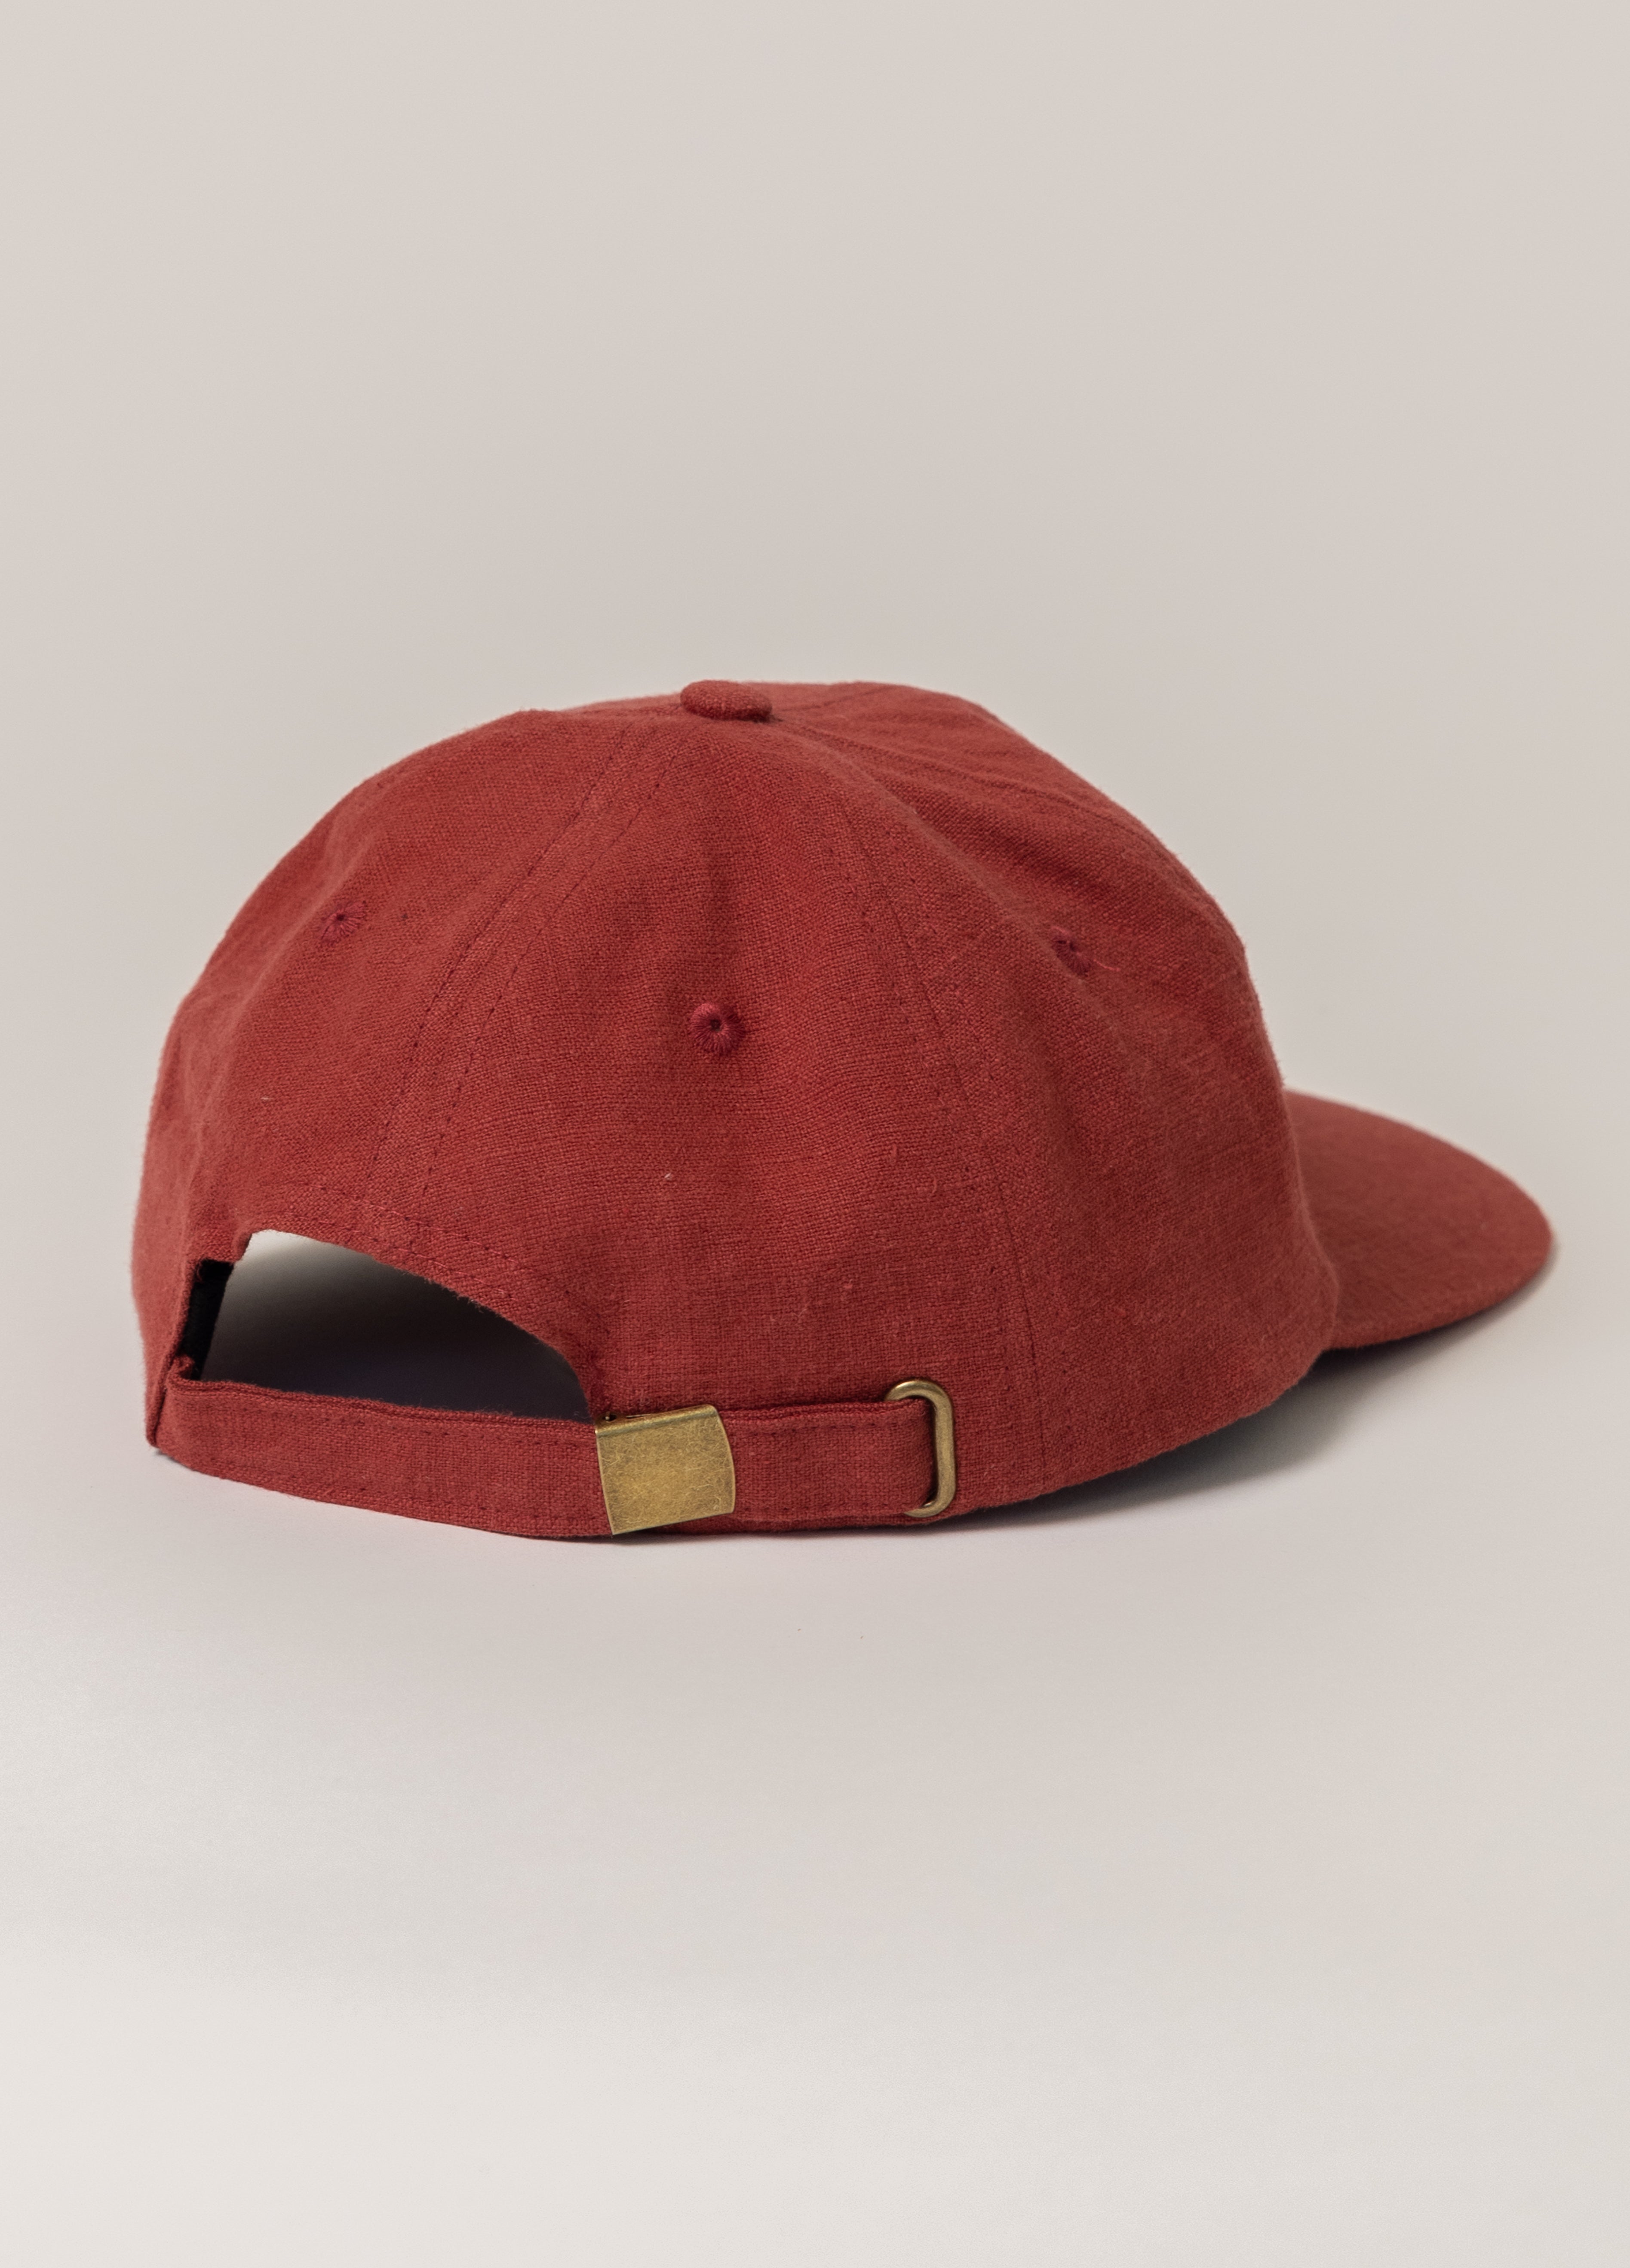 Sunny Lid - Red